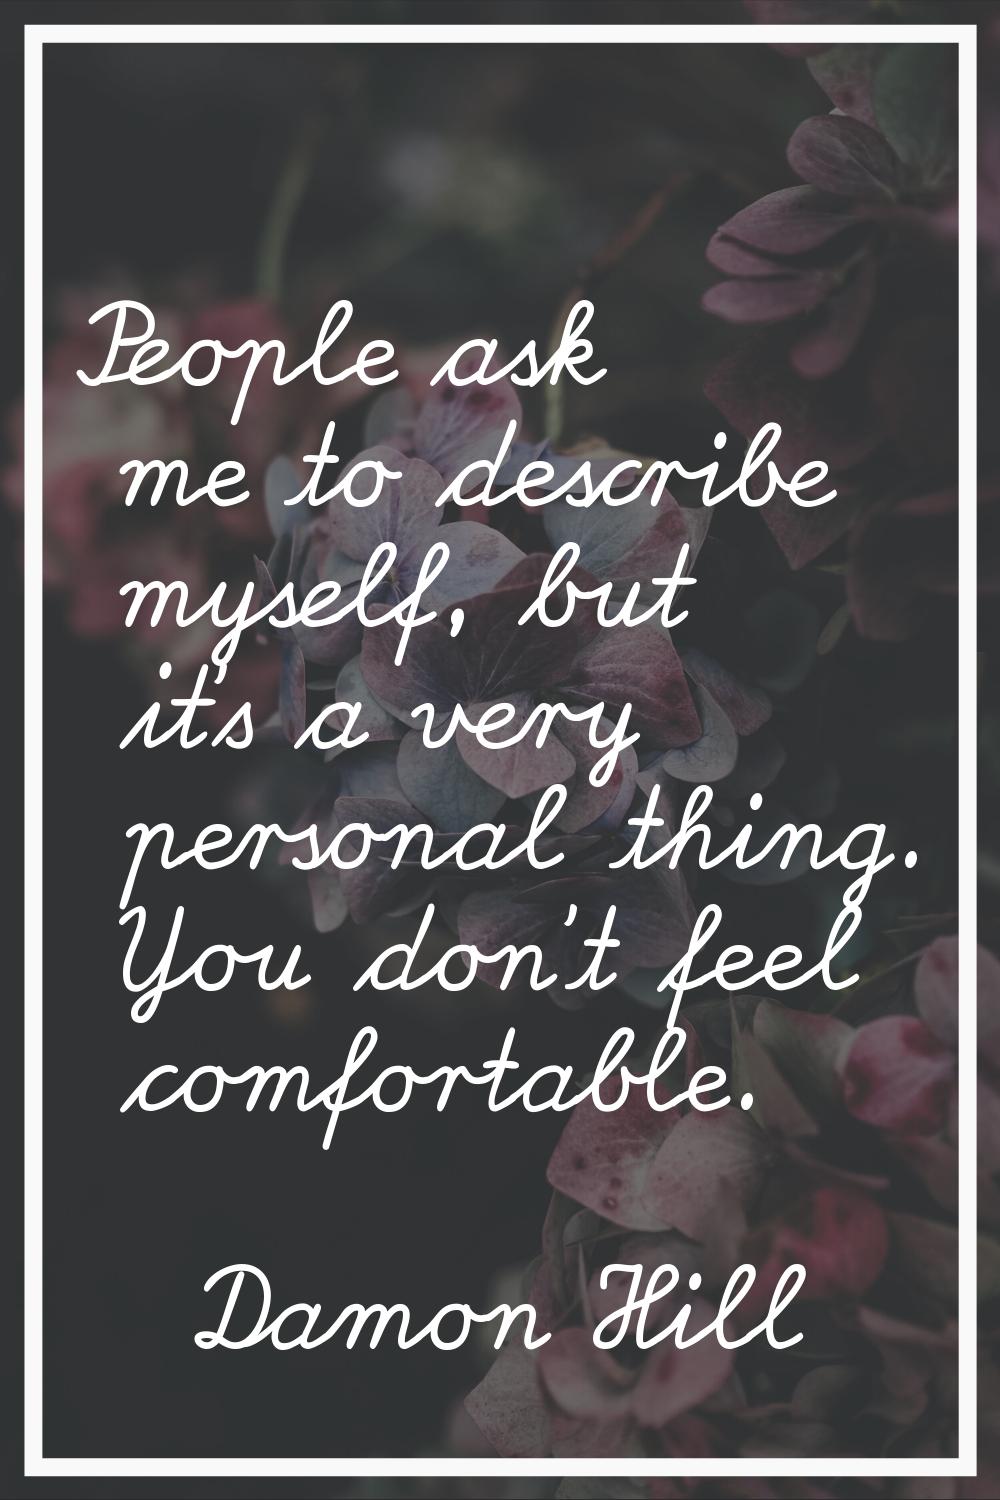 People ask me to describe myself, but it's a very personal thing. You don't feel comfortable.